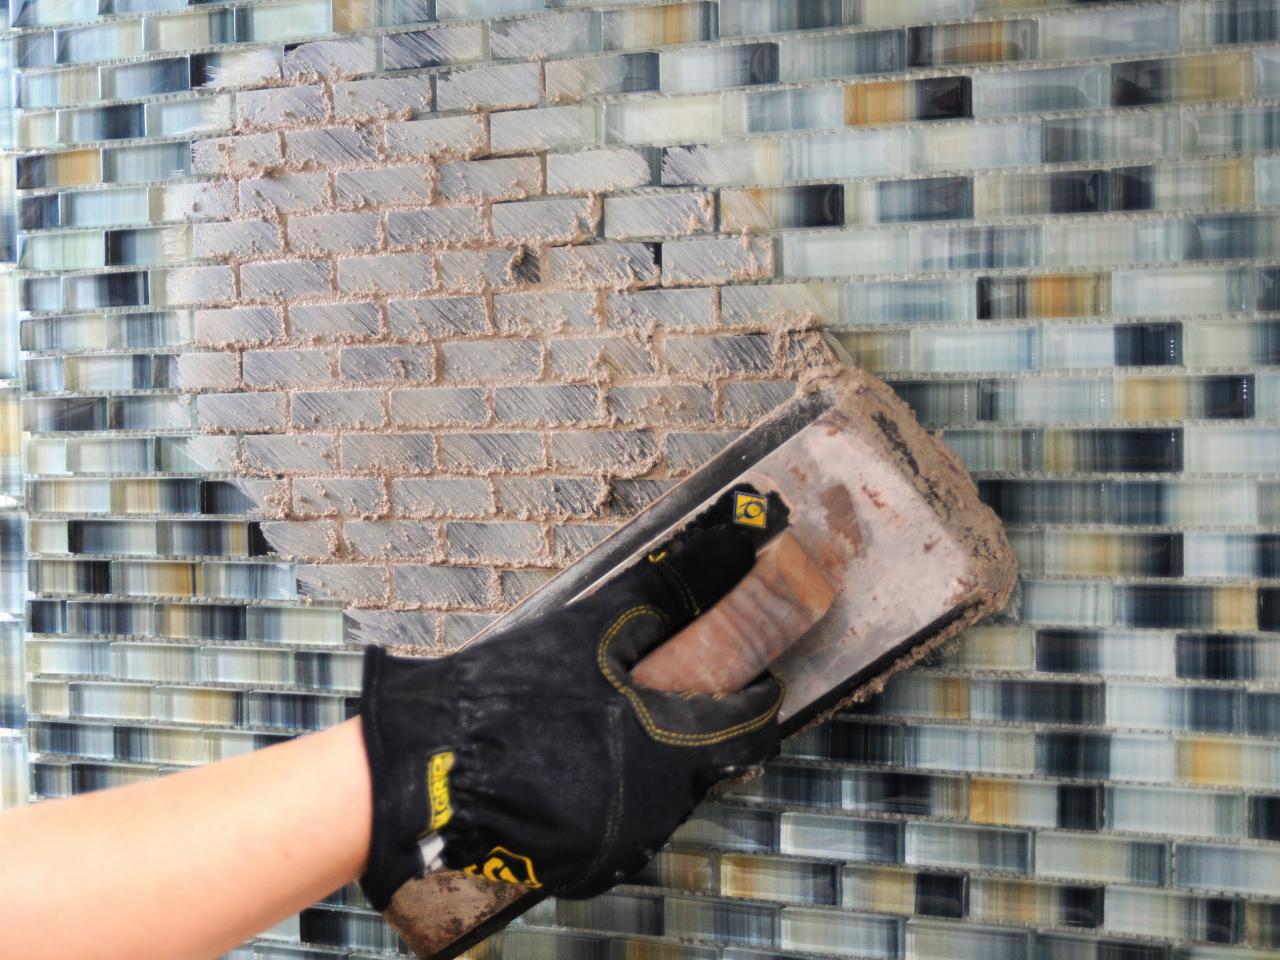 How To Install A Tile Backsplash, How Thick Is Standard Subway Tile Size